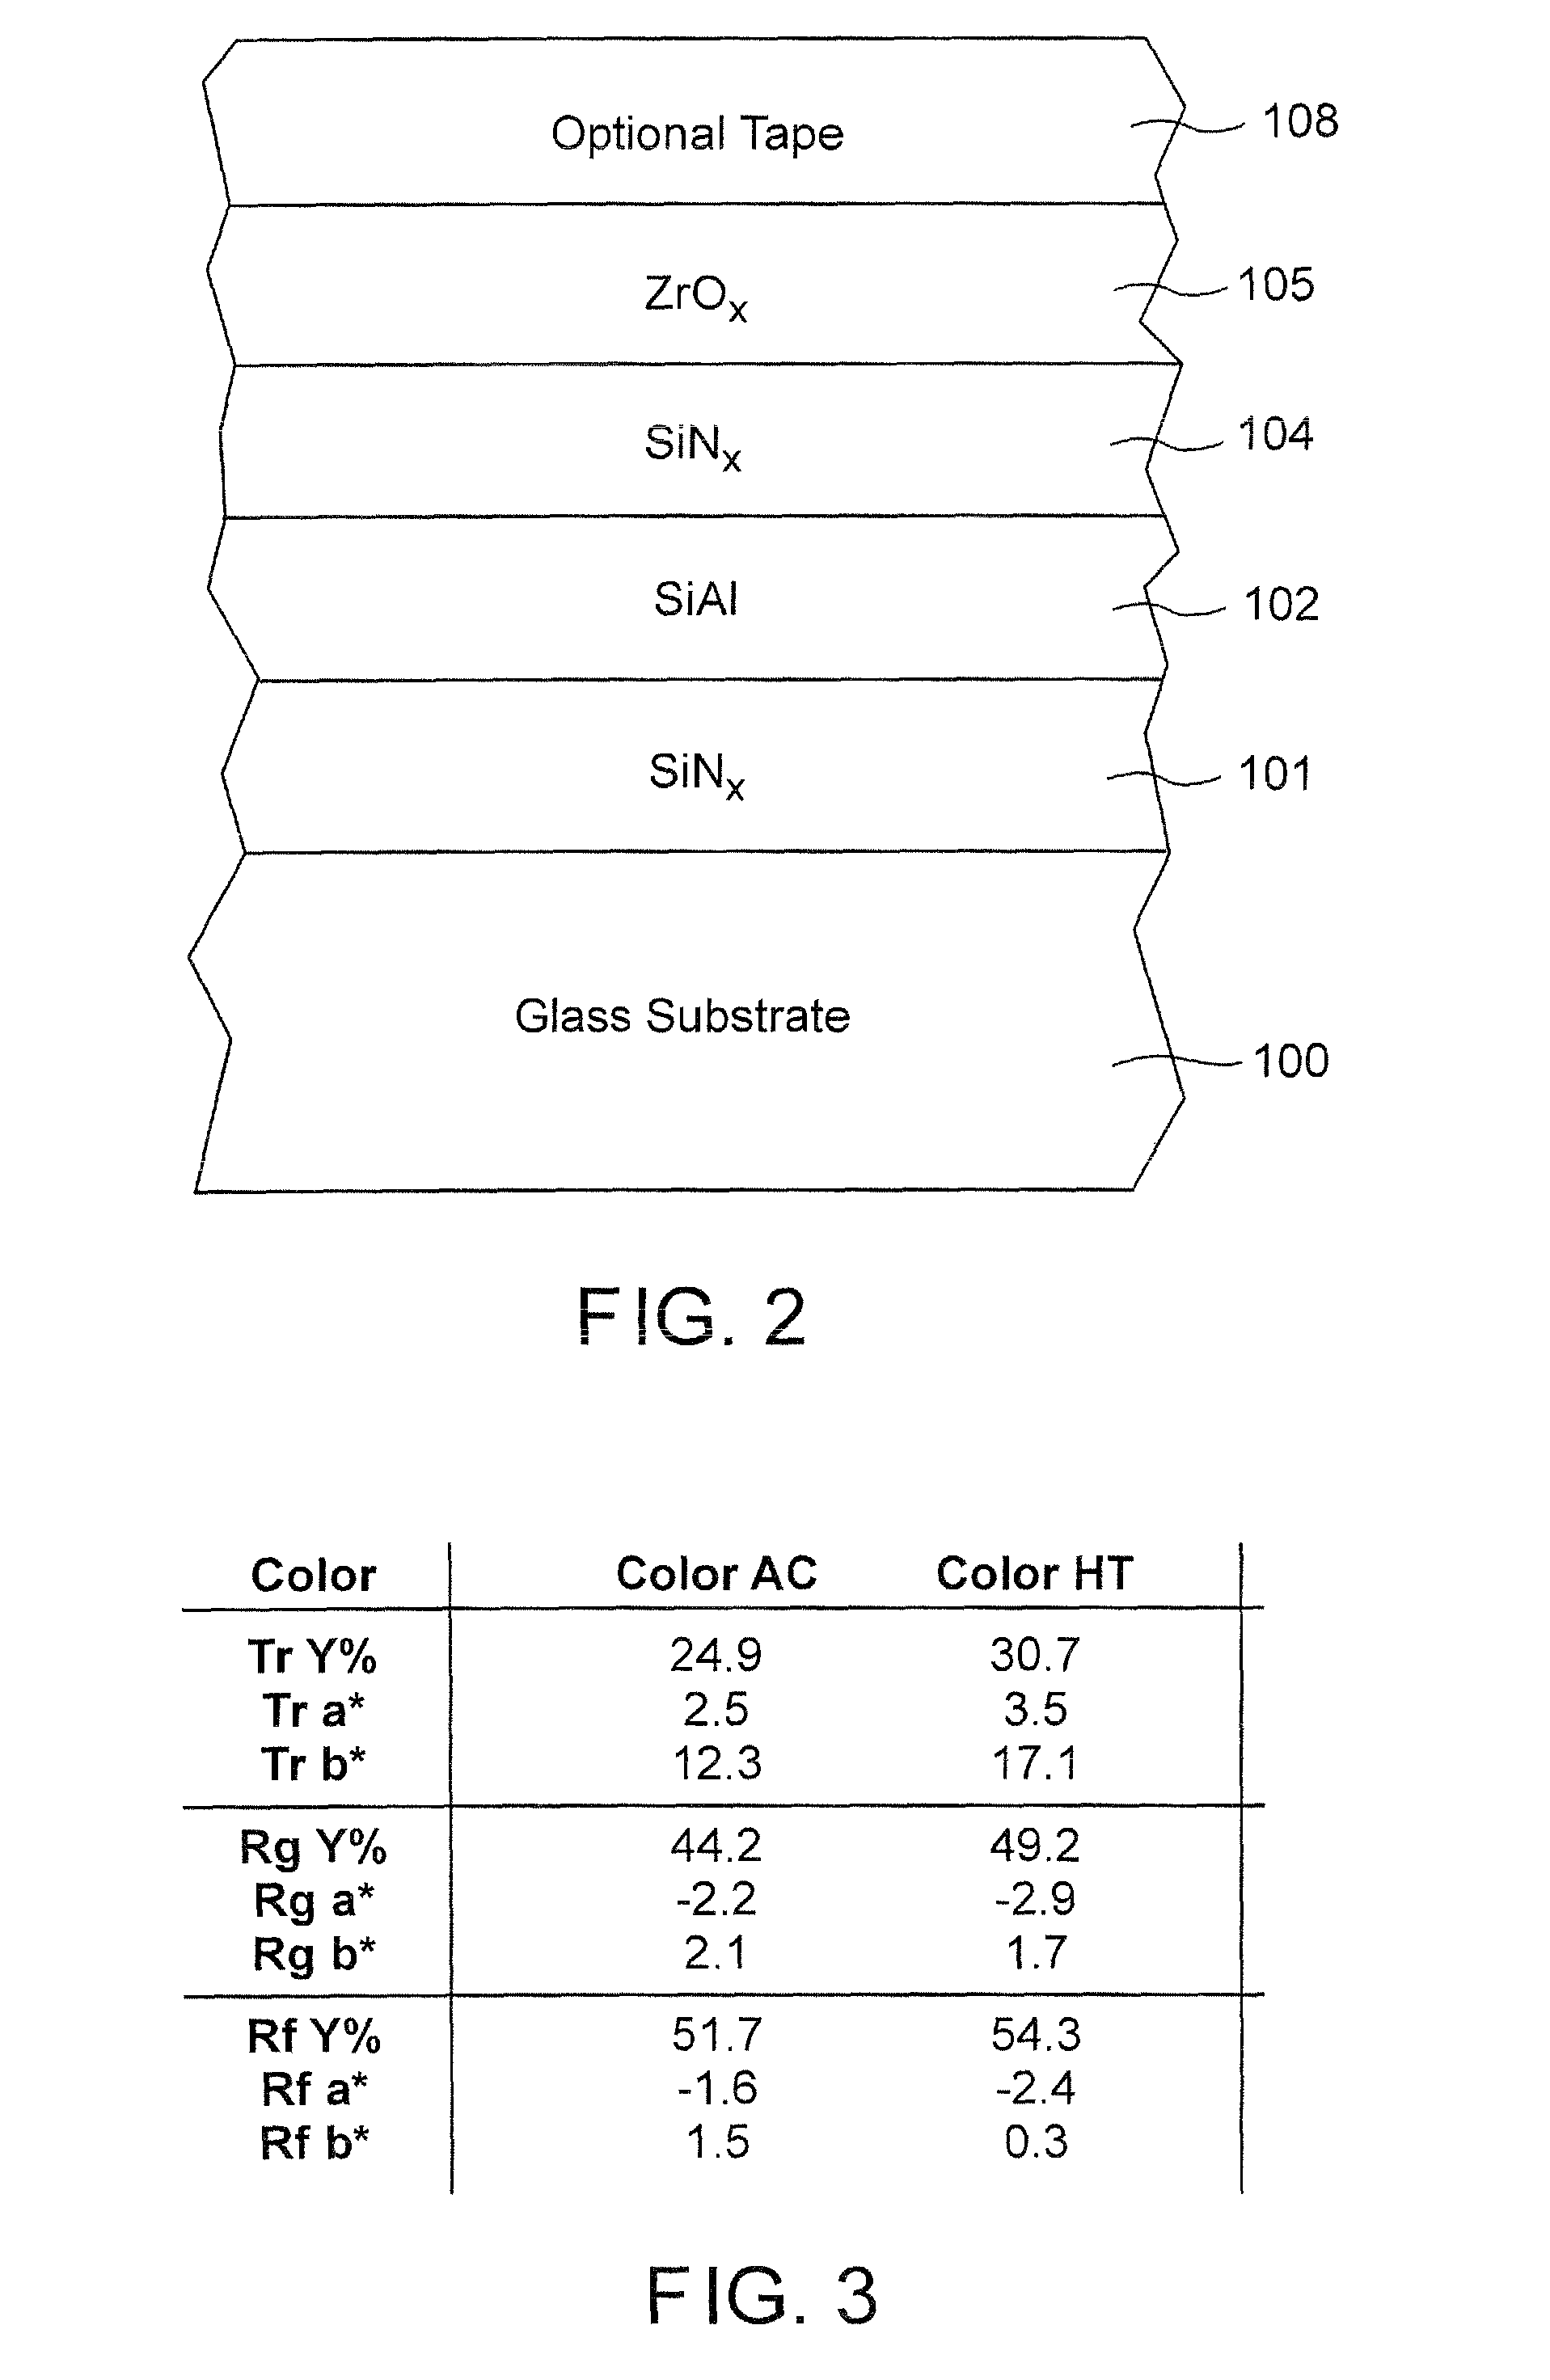 Mirror having reflective layer of or including silicon aluminum